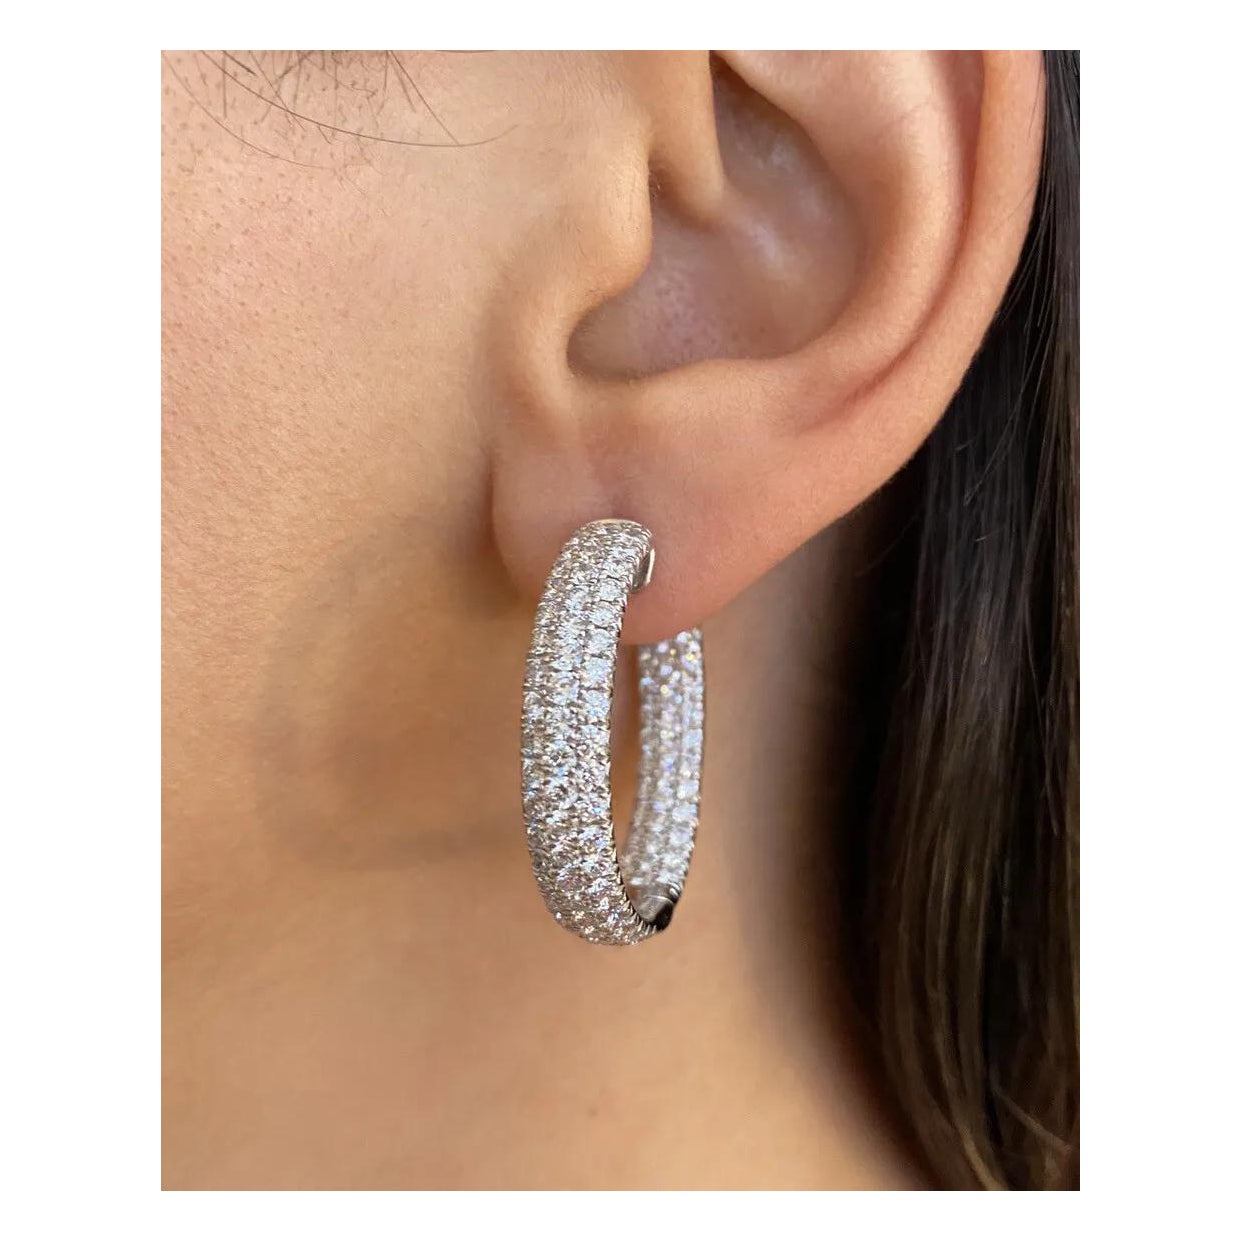 5.25 Carats Inside Out Round Pavé Diamond Large Hoop Earrings in 18k White Gold